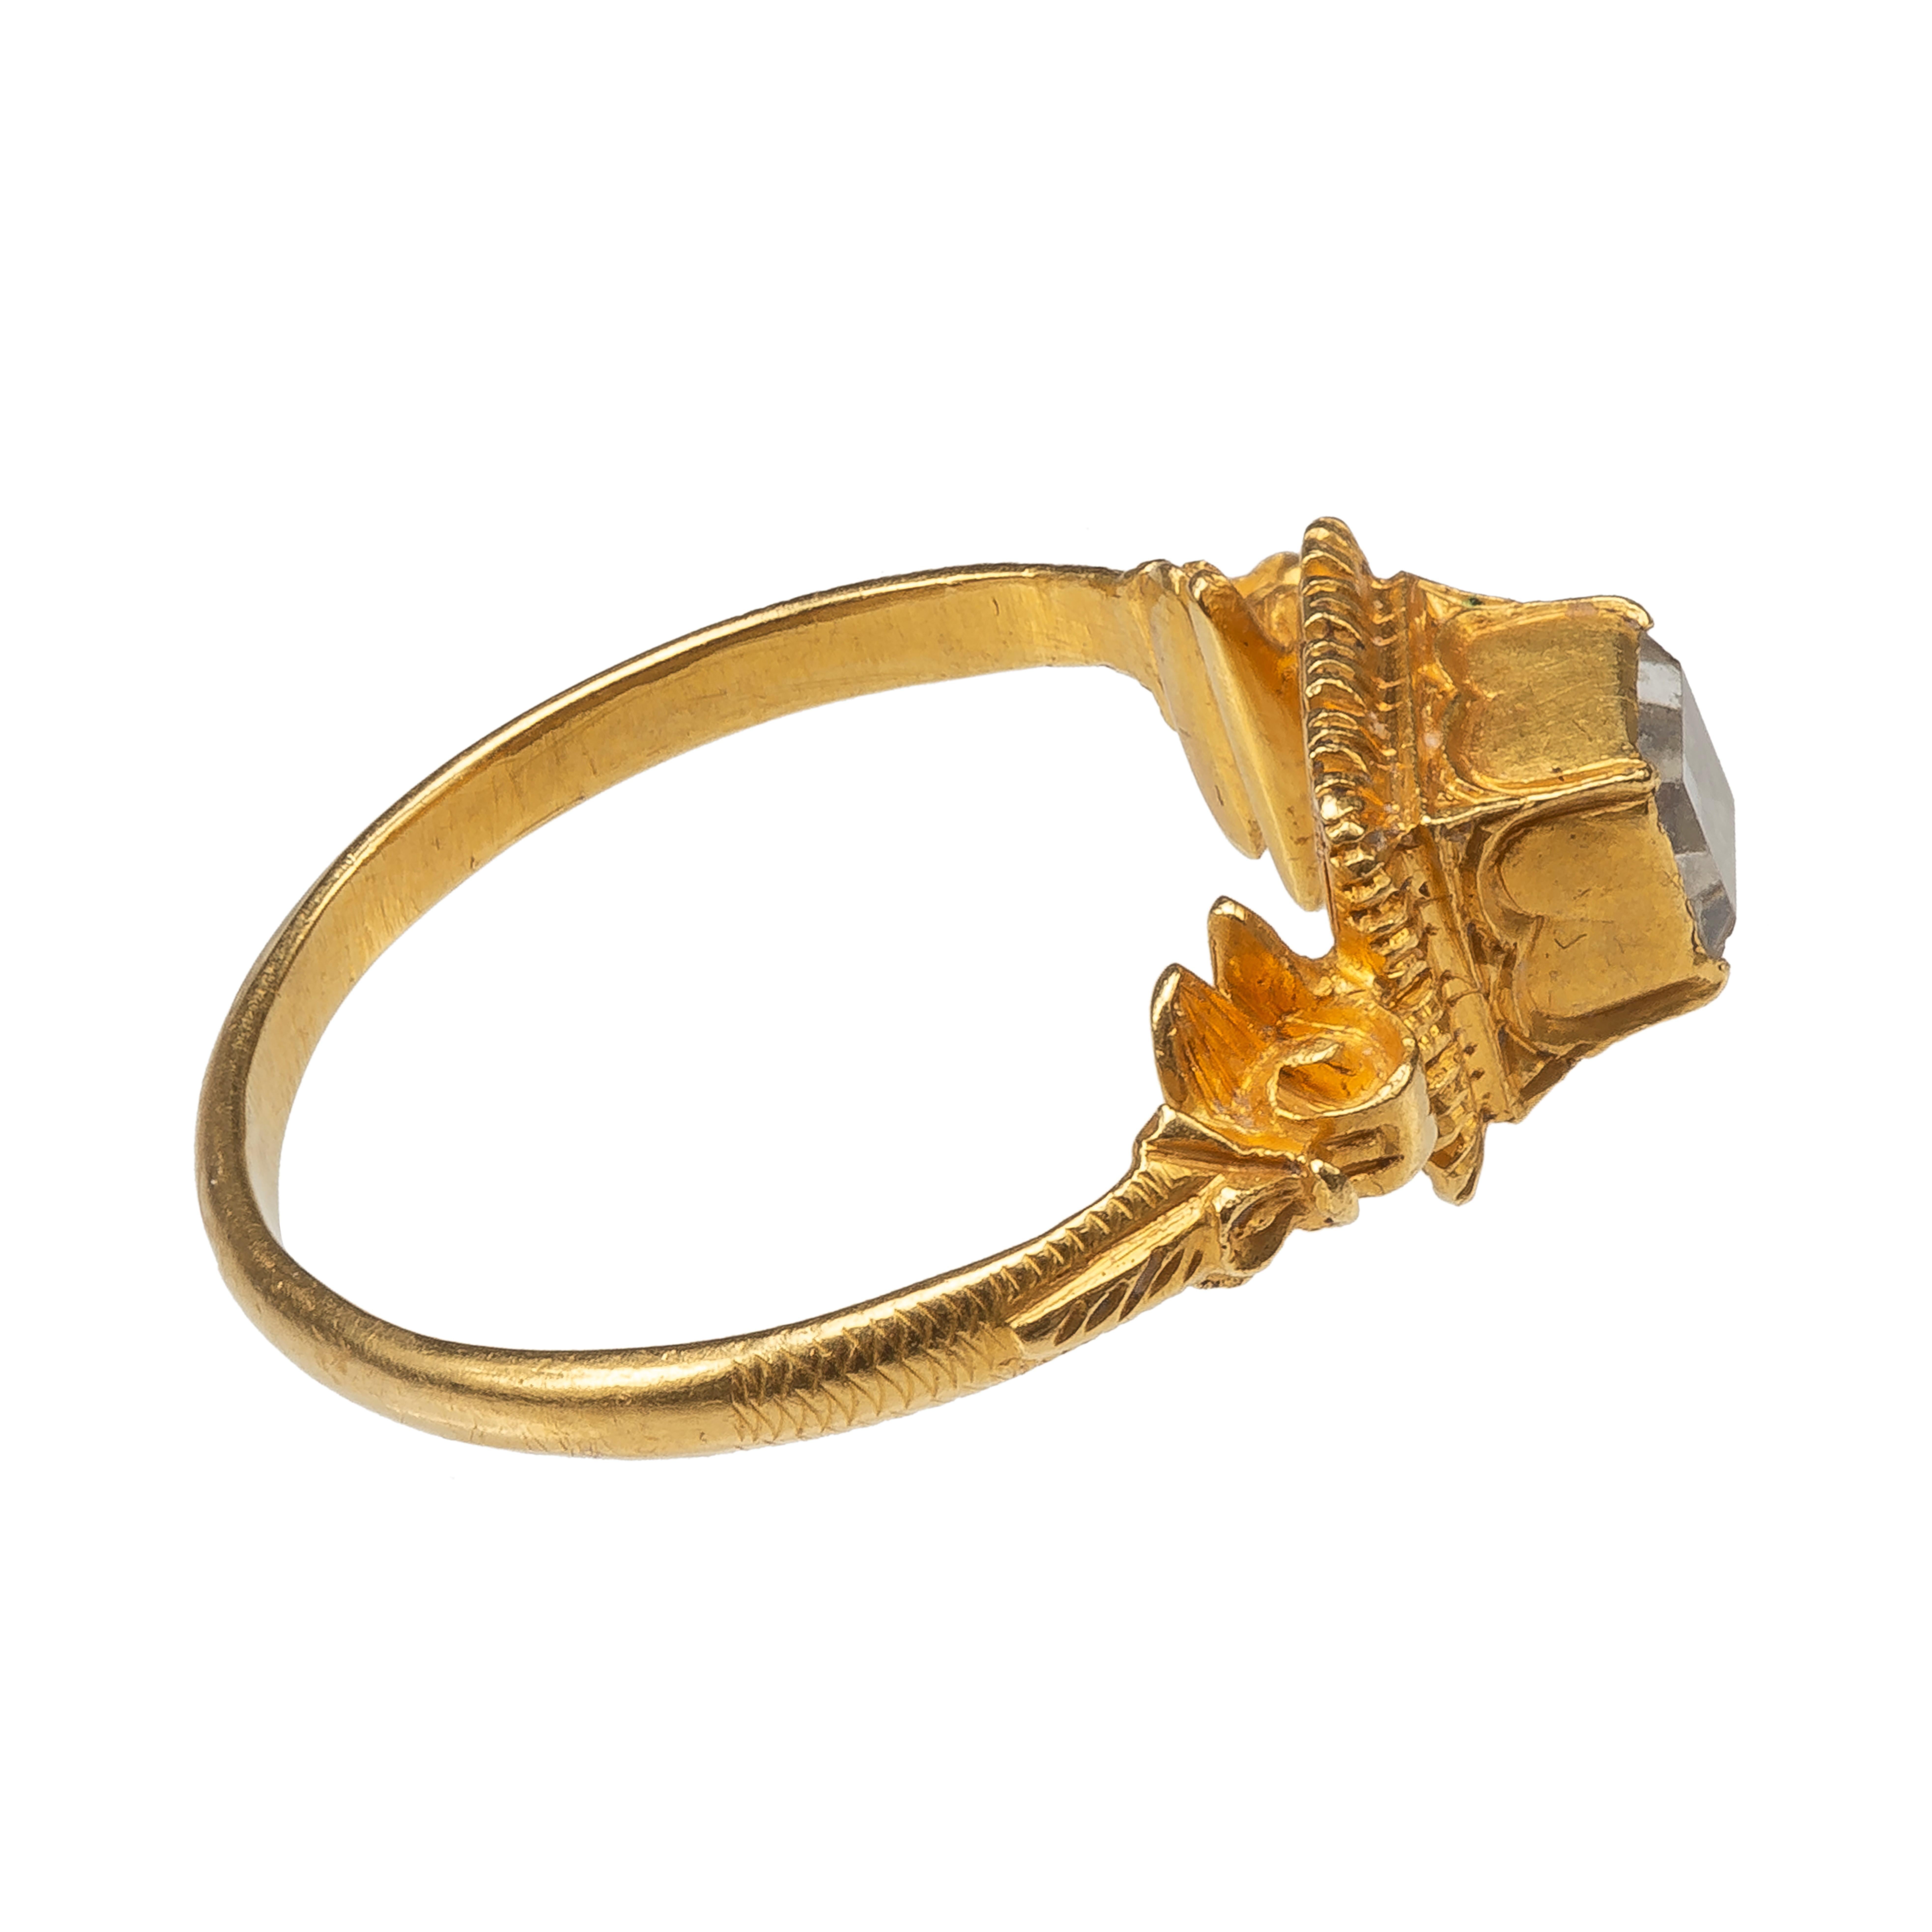 Renaissance Gold Marriage Ring with Table-Cut Rock Crystal For Sale 1